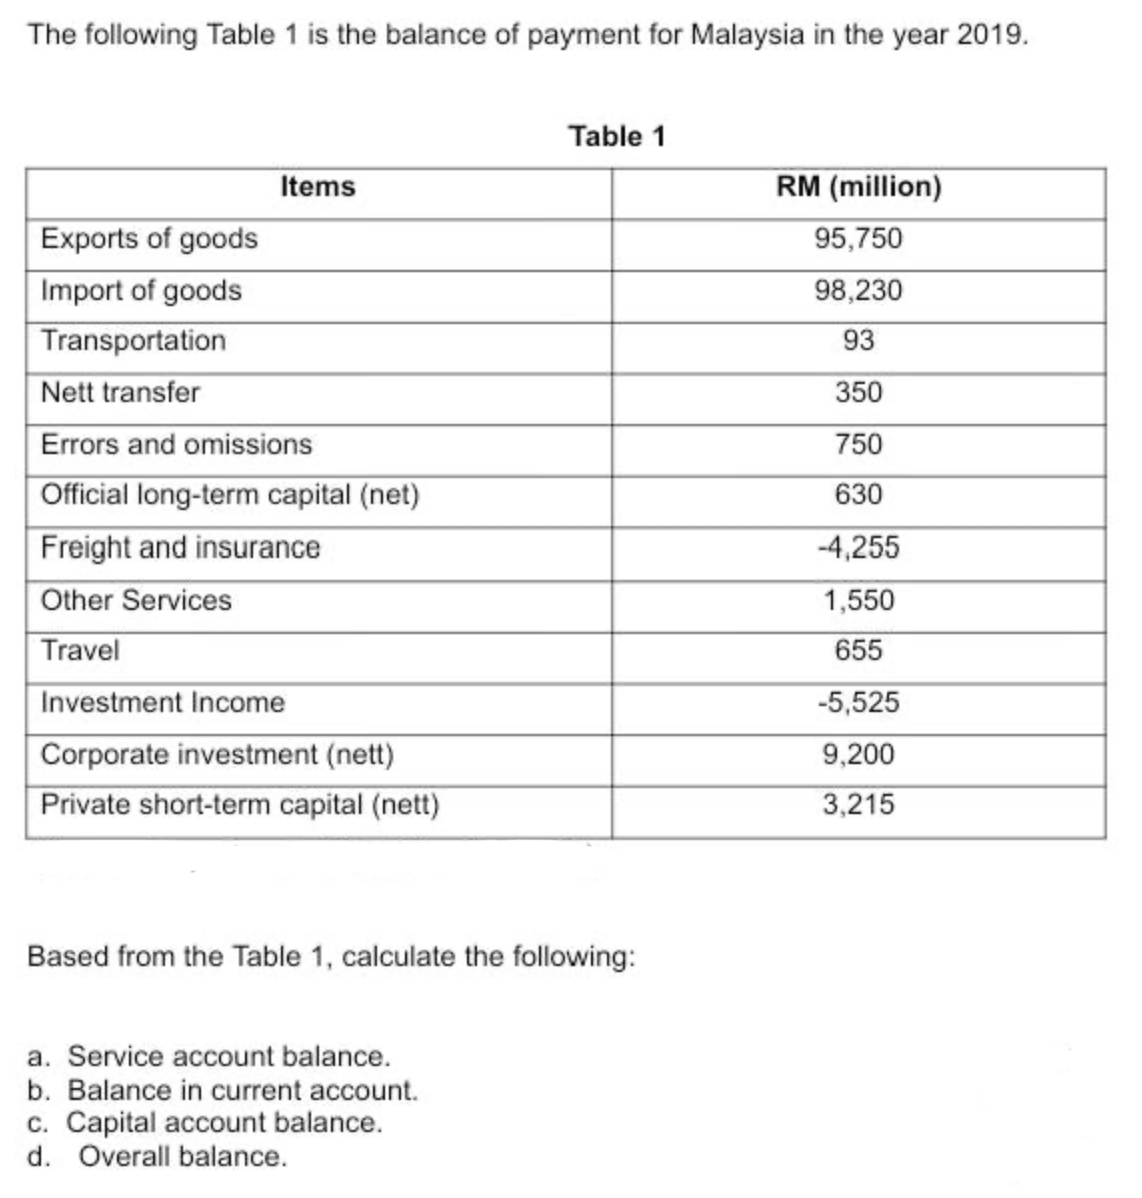 The following Table 1 is the balance of payment for Malaysia in the year 2019.
Table 1
Items
RM (million)
Exports of goods
95,750
Import of goods
98,230
Transportation
93
Nett transfer
350
Errors and omissions
750
Official long-term capital (net)
630
Freight and insurance
-4,255
Other Services
1,550
Travel
655
Investment Income
-5,525
Corporate investment (nett)
9,200
Private short-term capital (nett)
3,215
Based from the Table 1, calculate the following:
a. Service account balance.
b. Balance in current account.
c. Capital account balance.
d. Overall balance.
